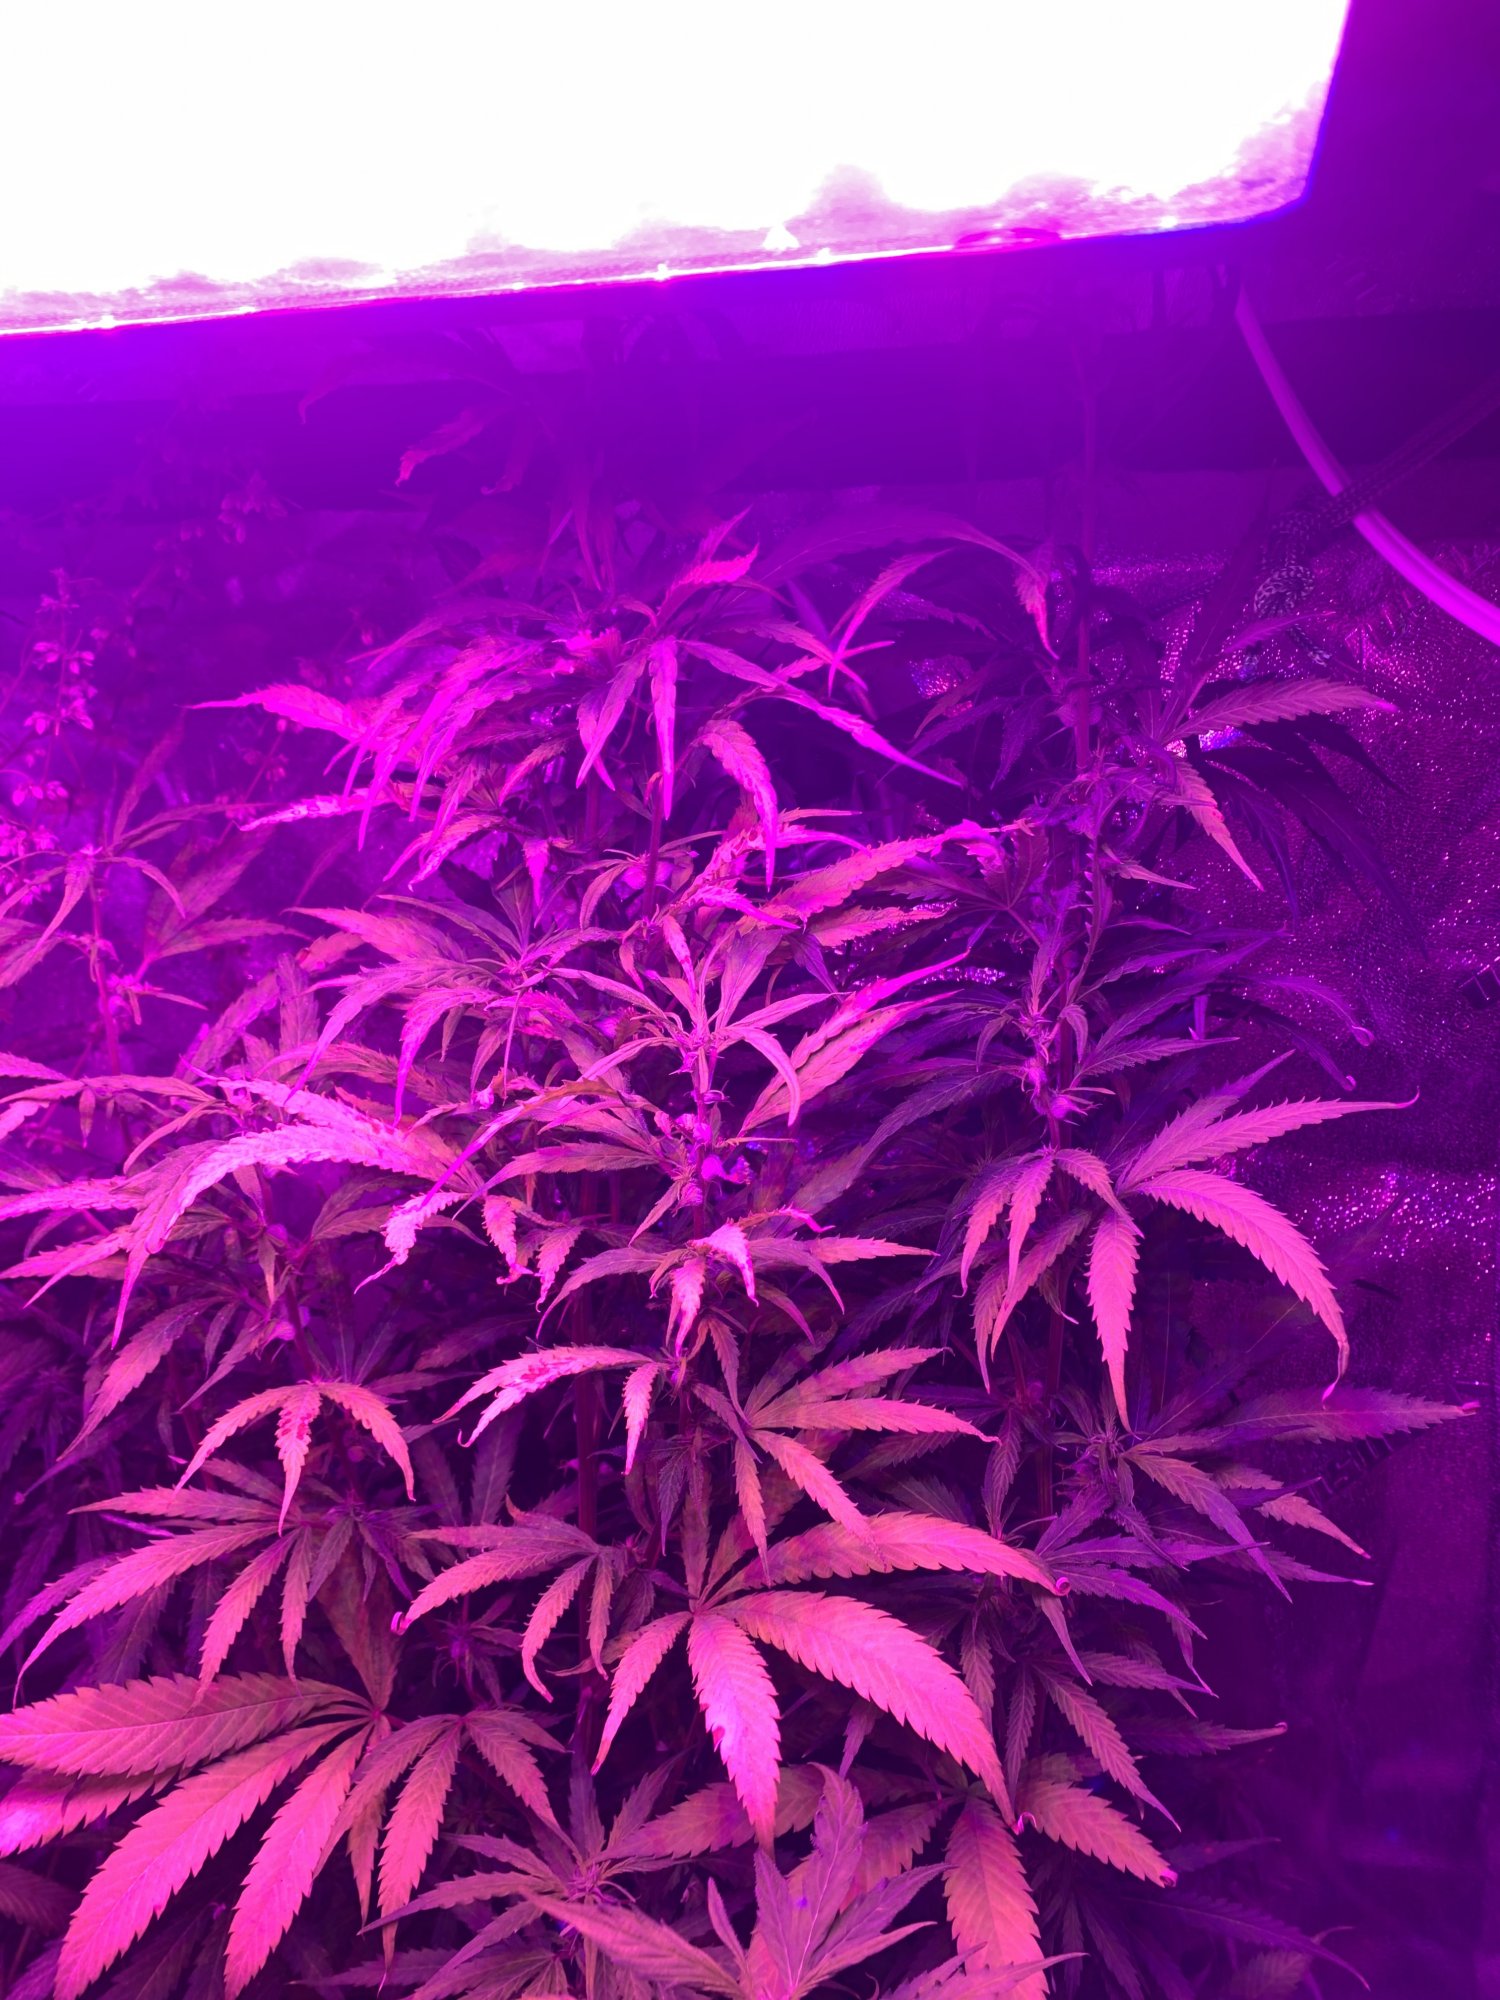 I need real help with breeding autoflower i need more information as well 2